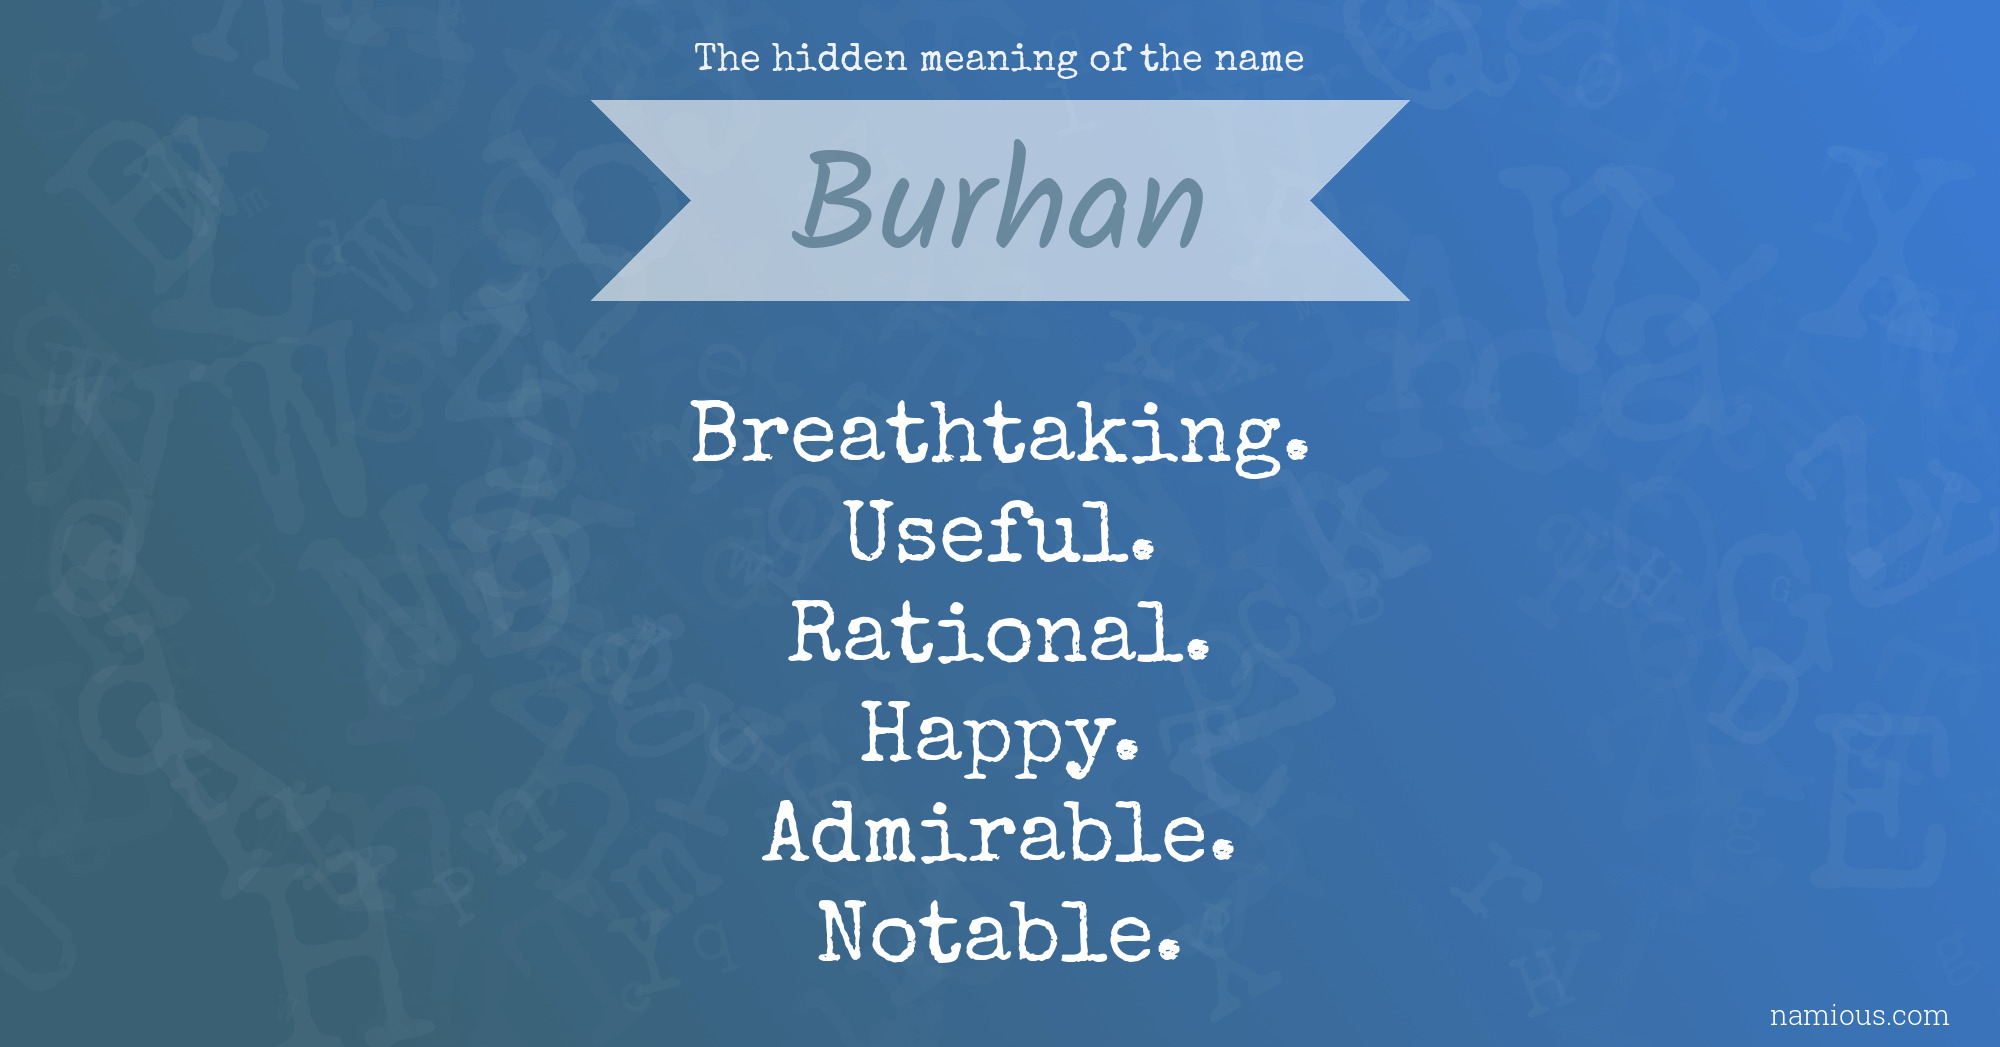 The hidden meaning of the name Burhan